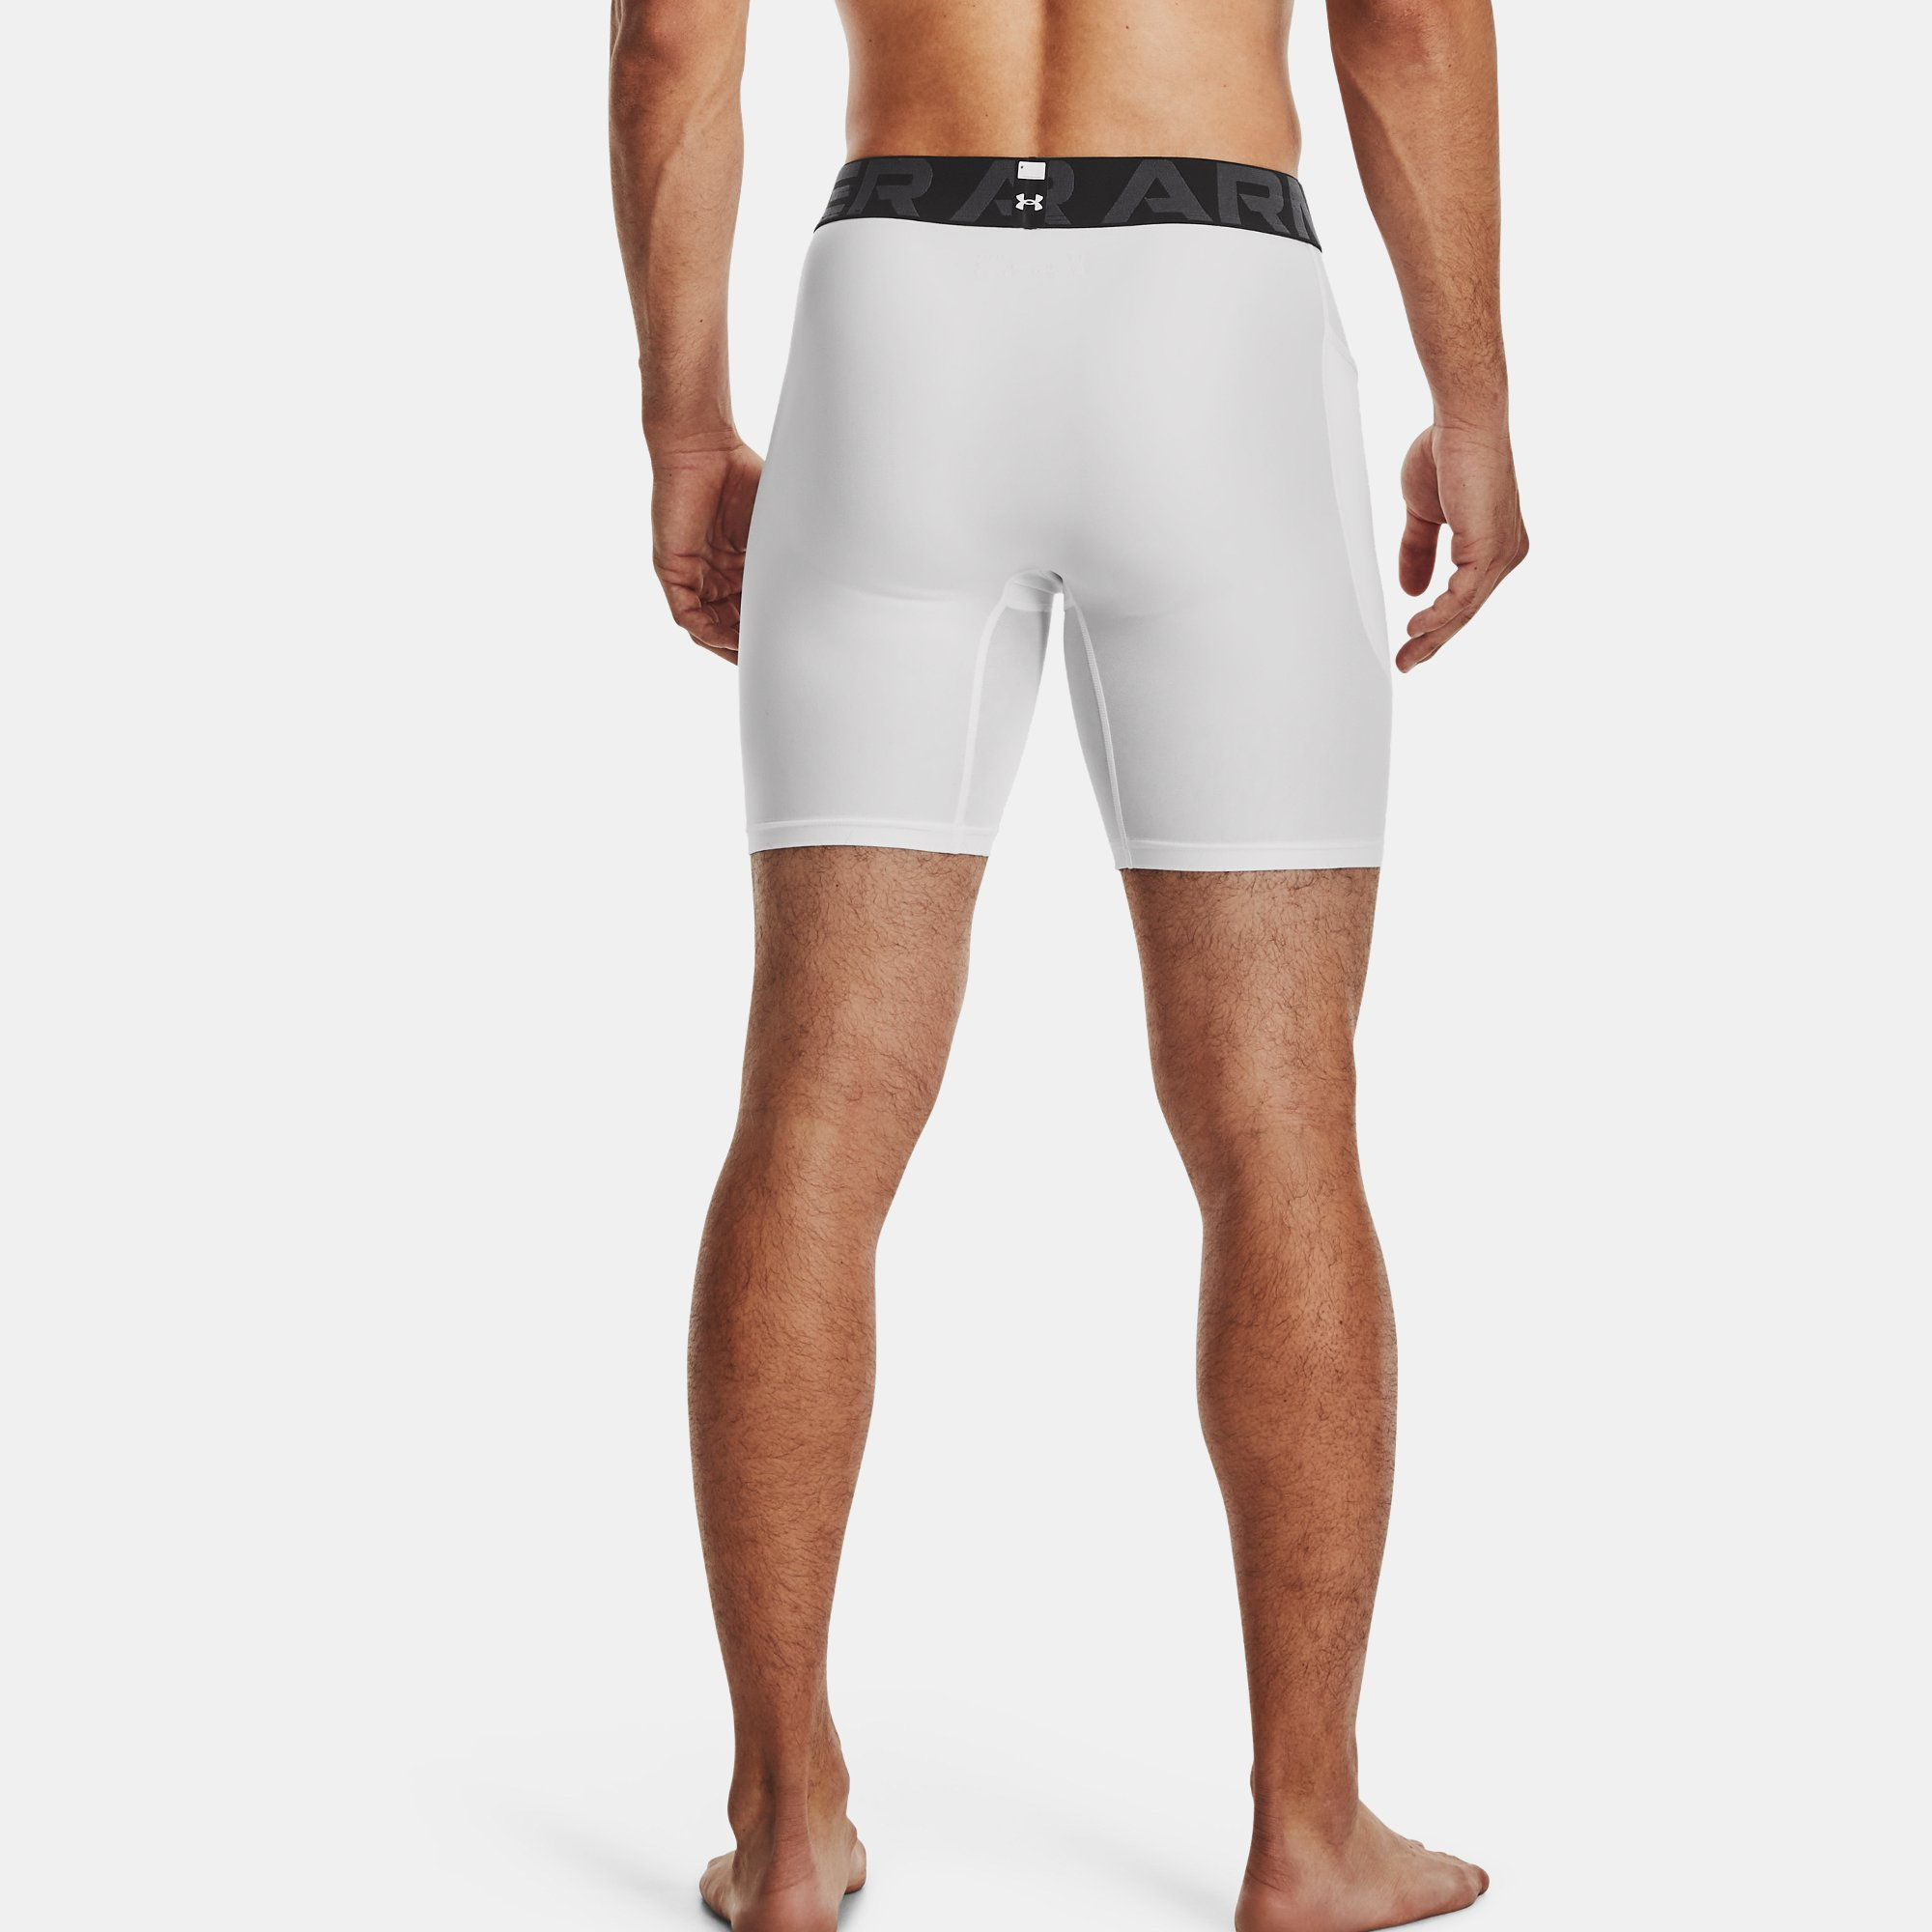 Under Armour Small Men’s Heat Gear Sonic Compression Shorts - White -  1236240